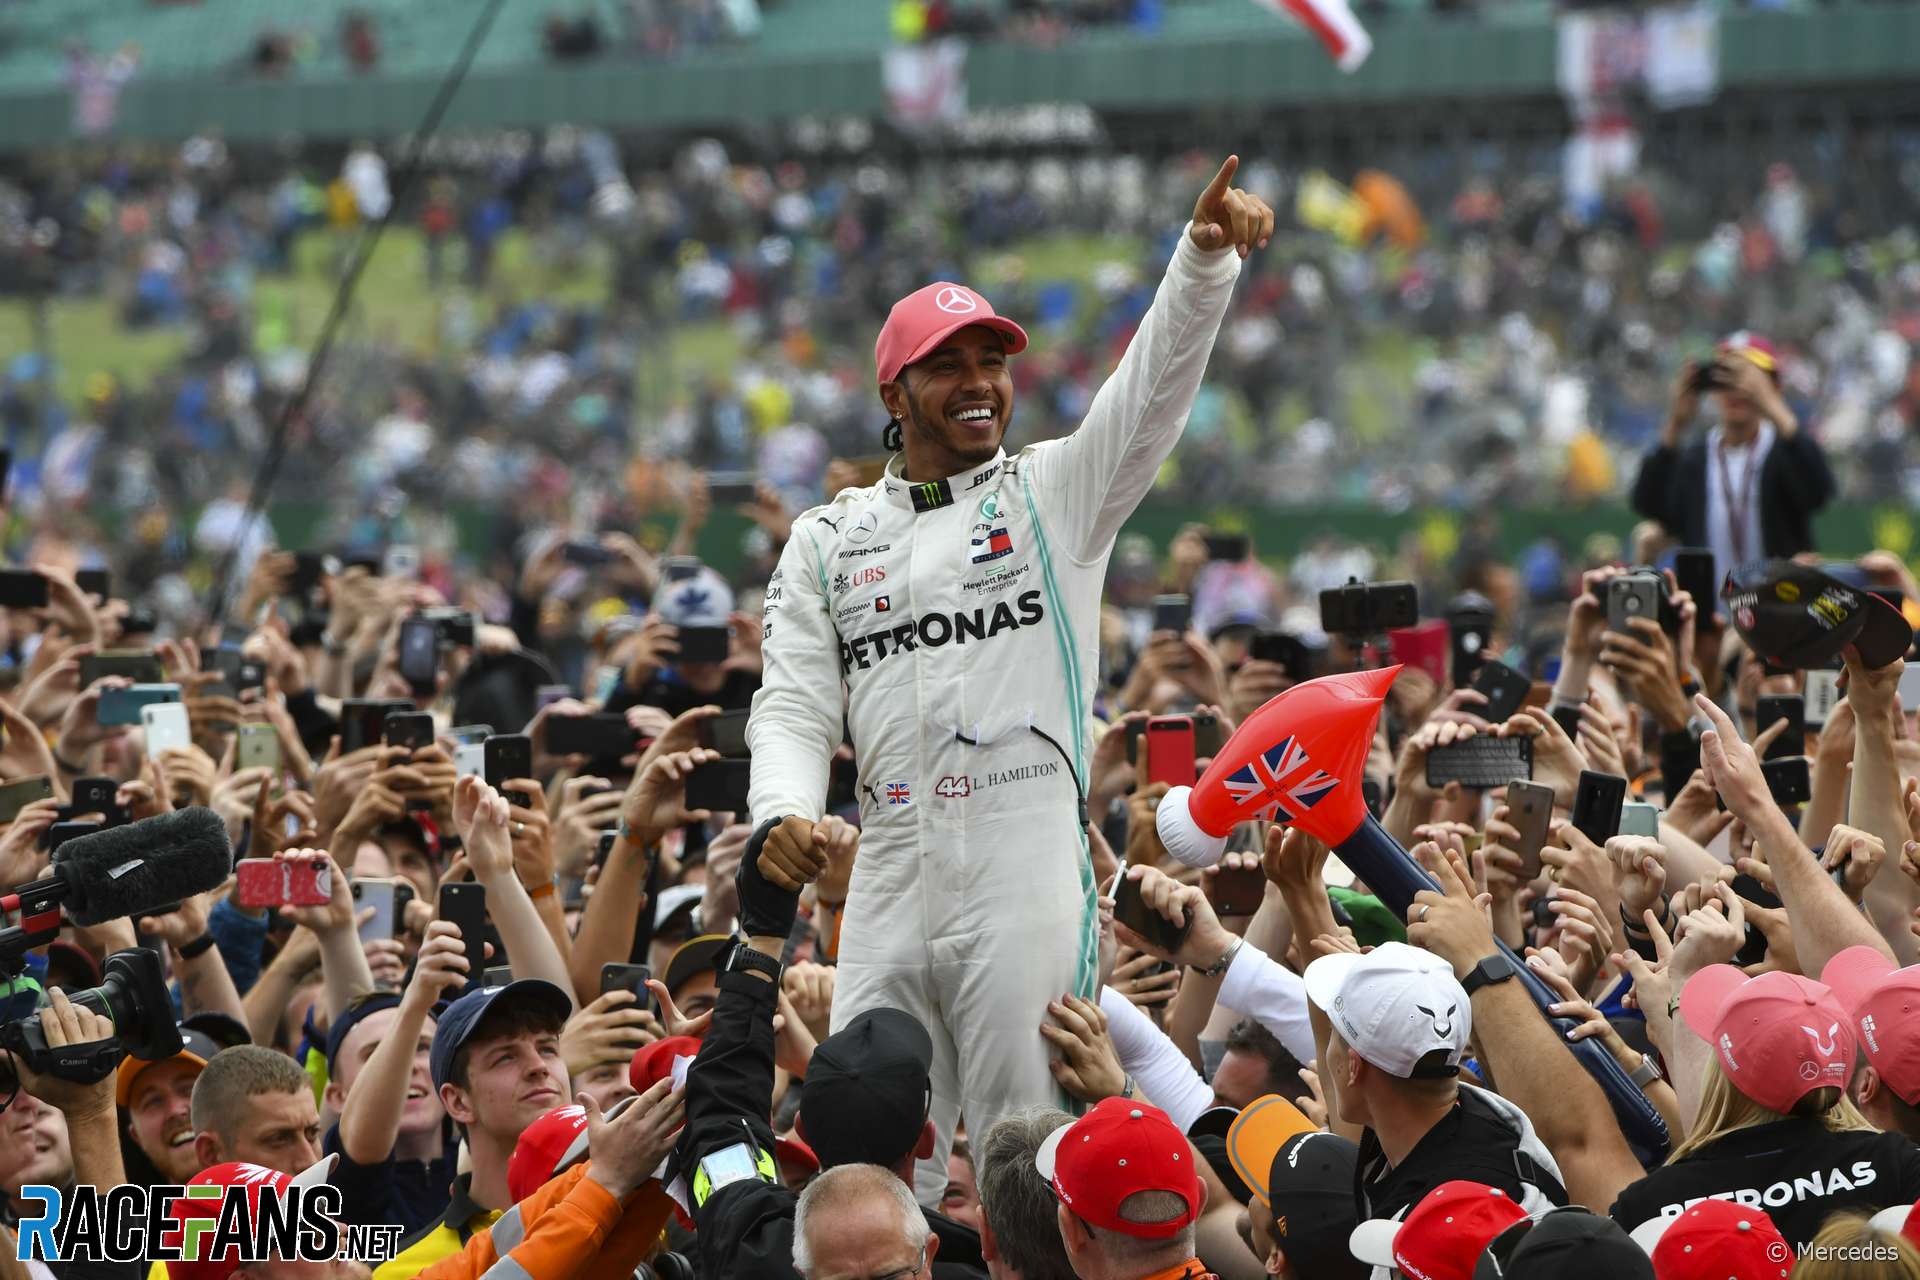 Hamilton aims to get a “working class kid” into F1